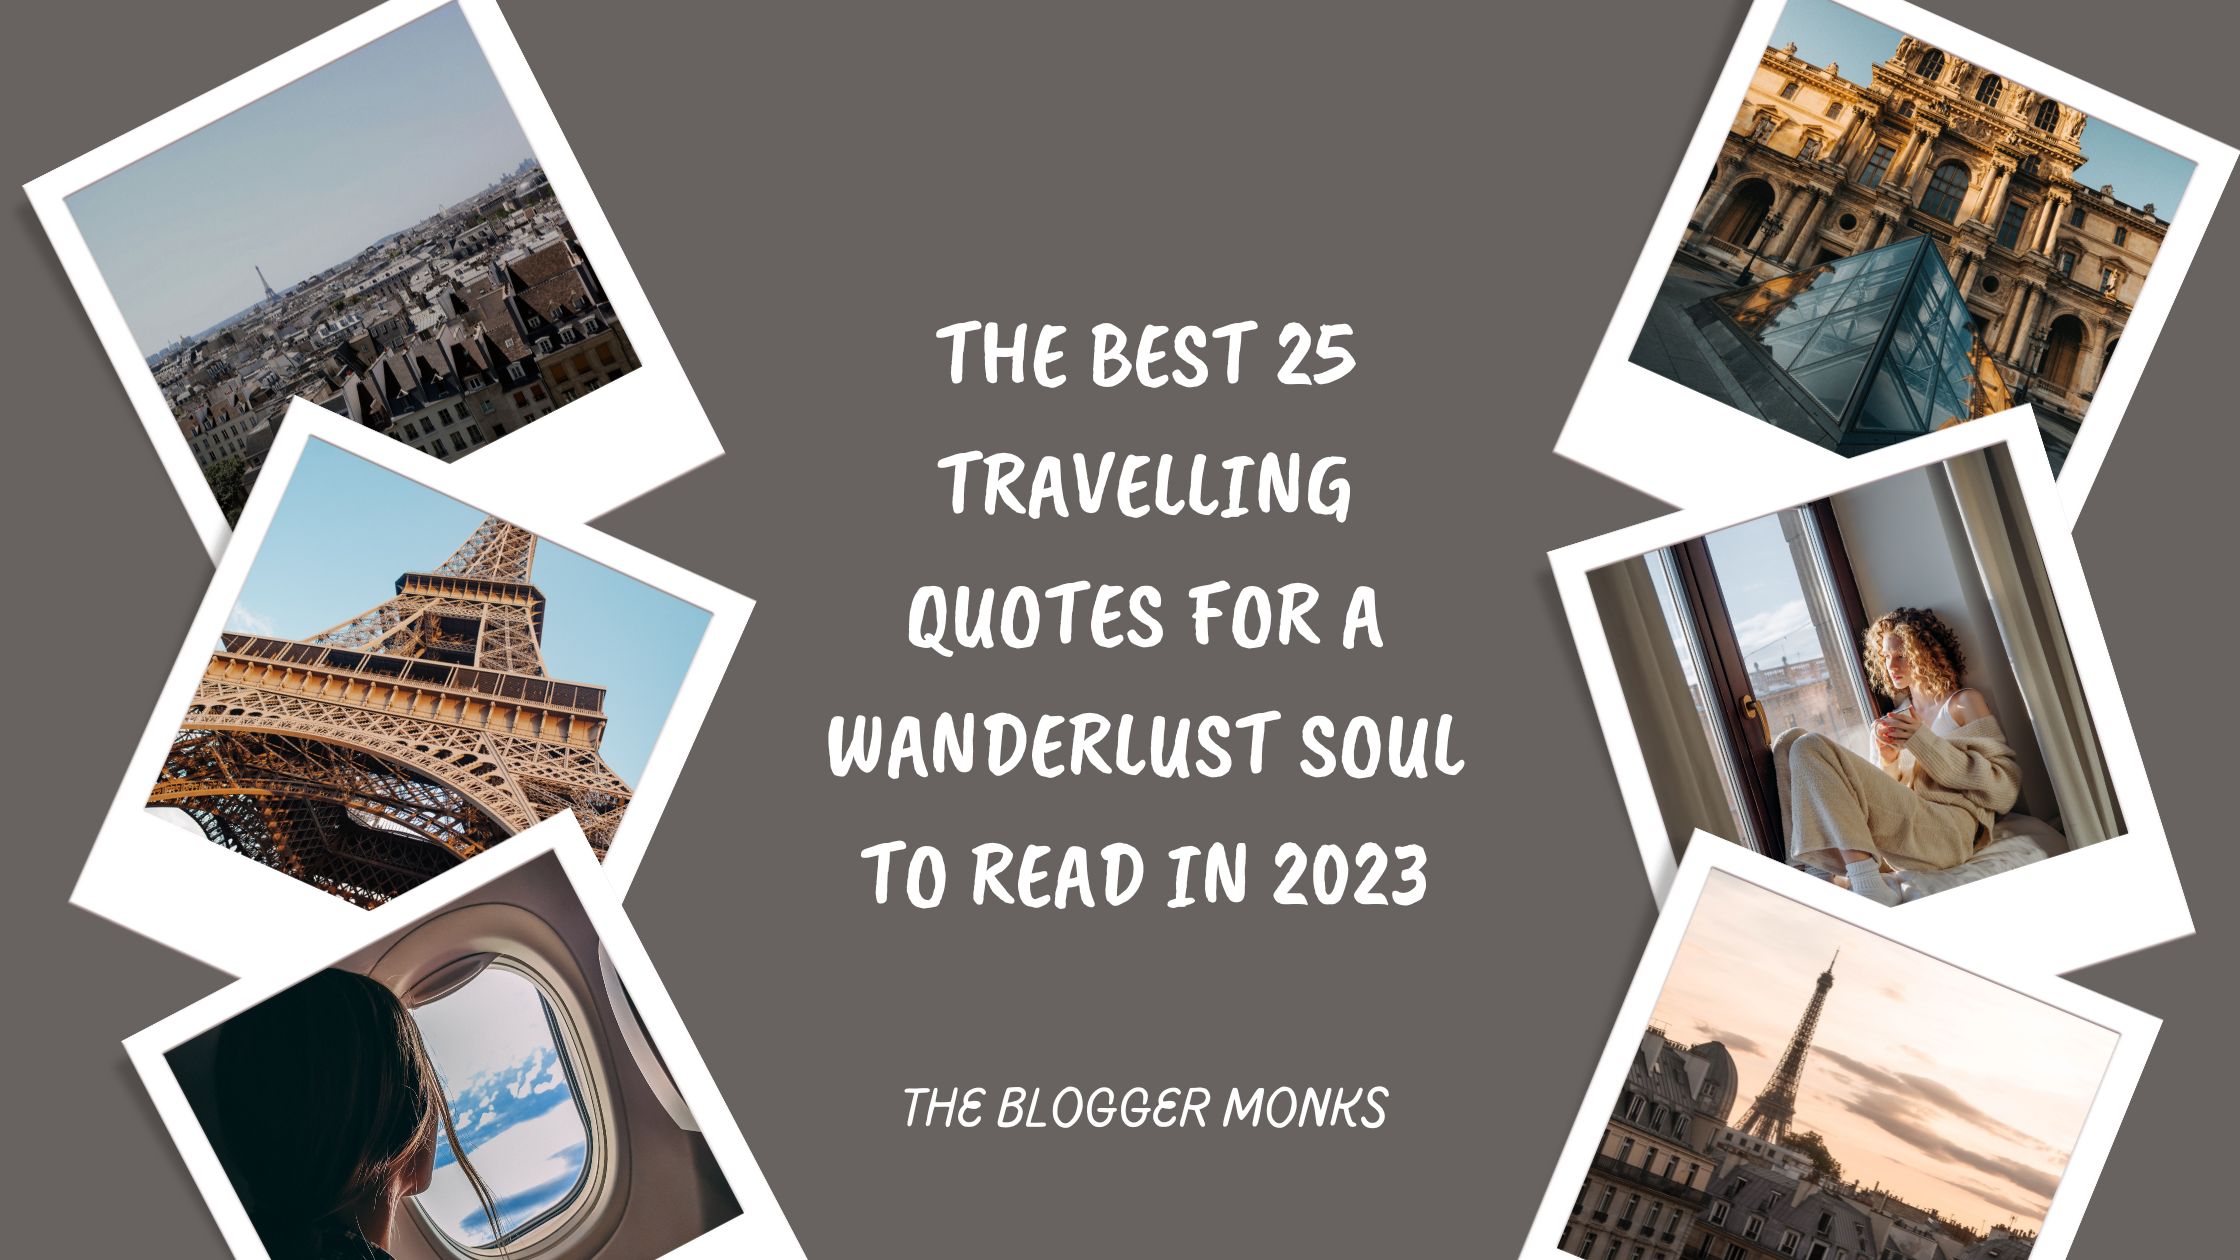 The Best 25 Travelling Quotes For A Wanderlust Soul To Read in 2023